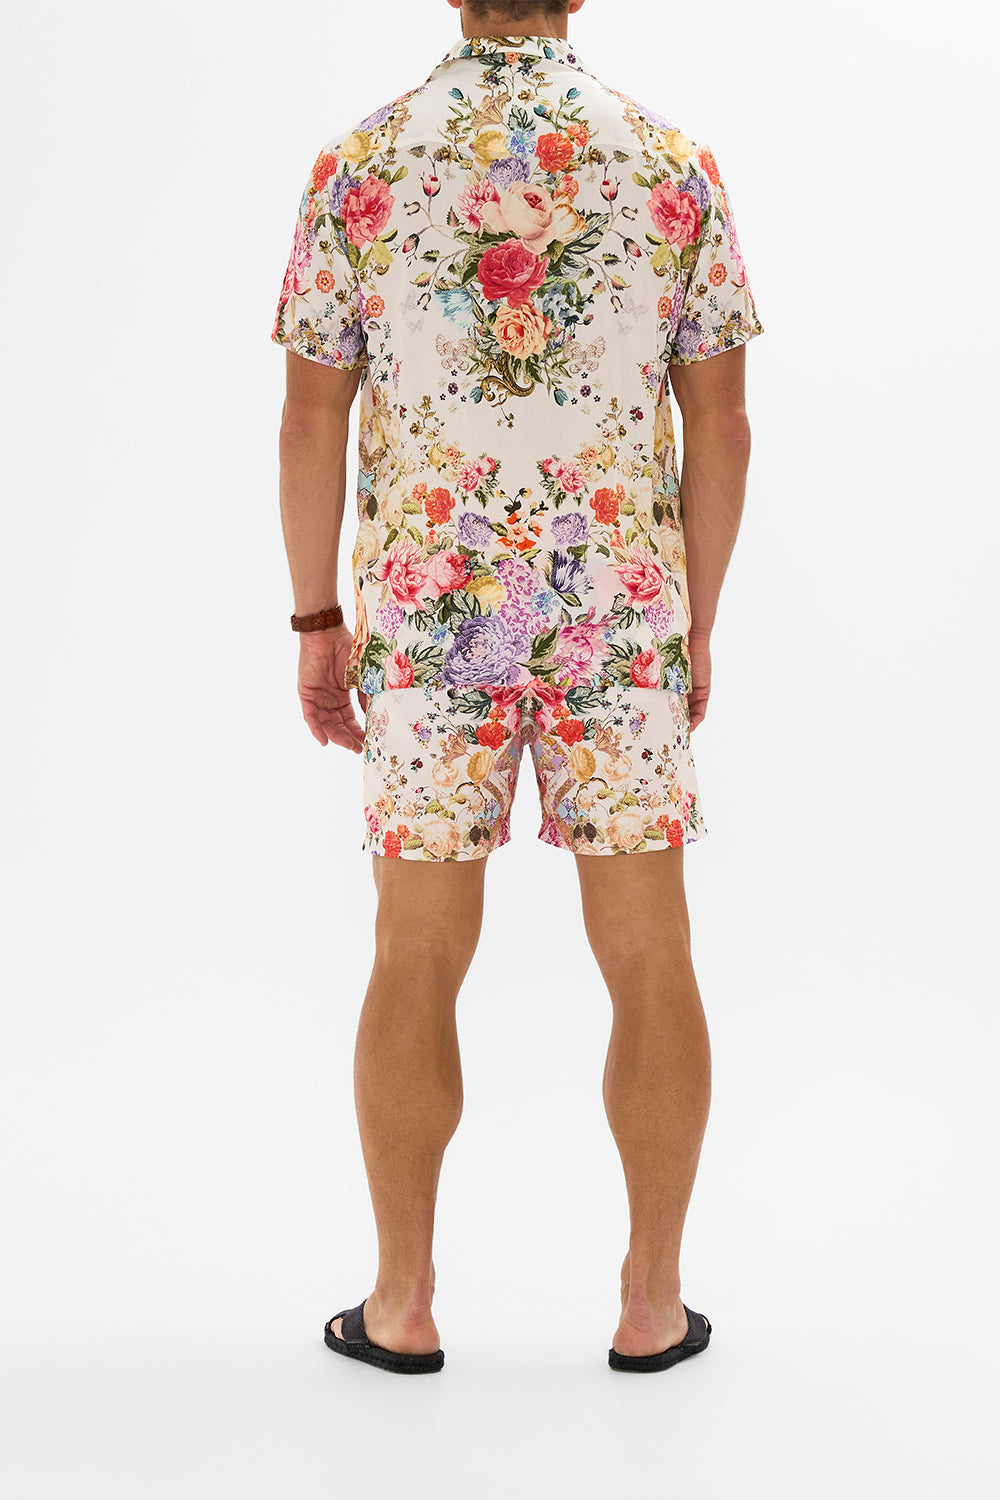 CAMILLA floral short sleeve camp collared shirt in Sew Yesterday